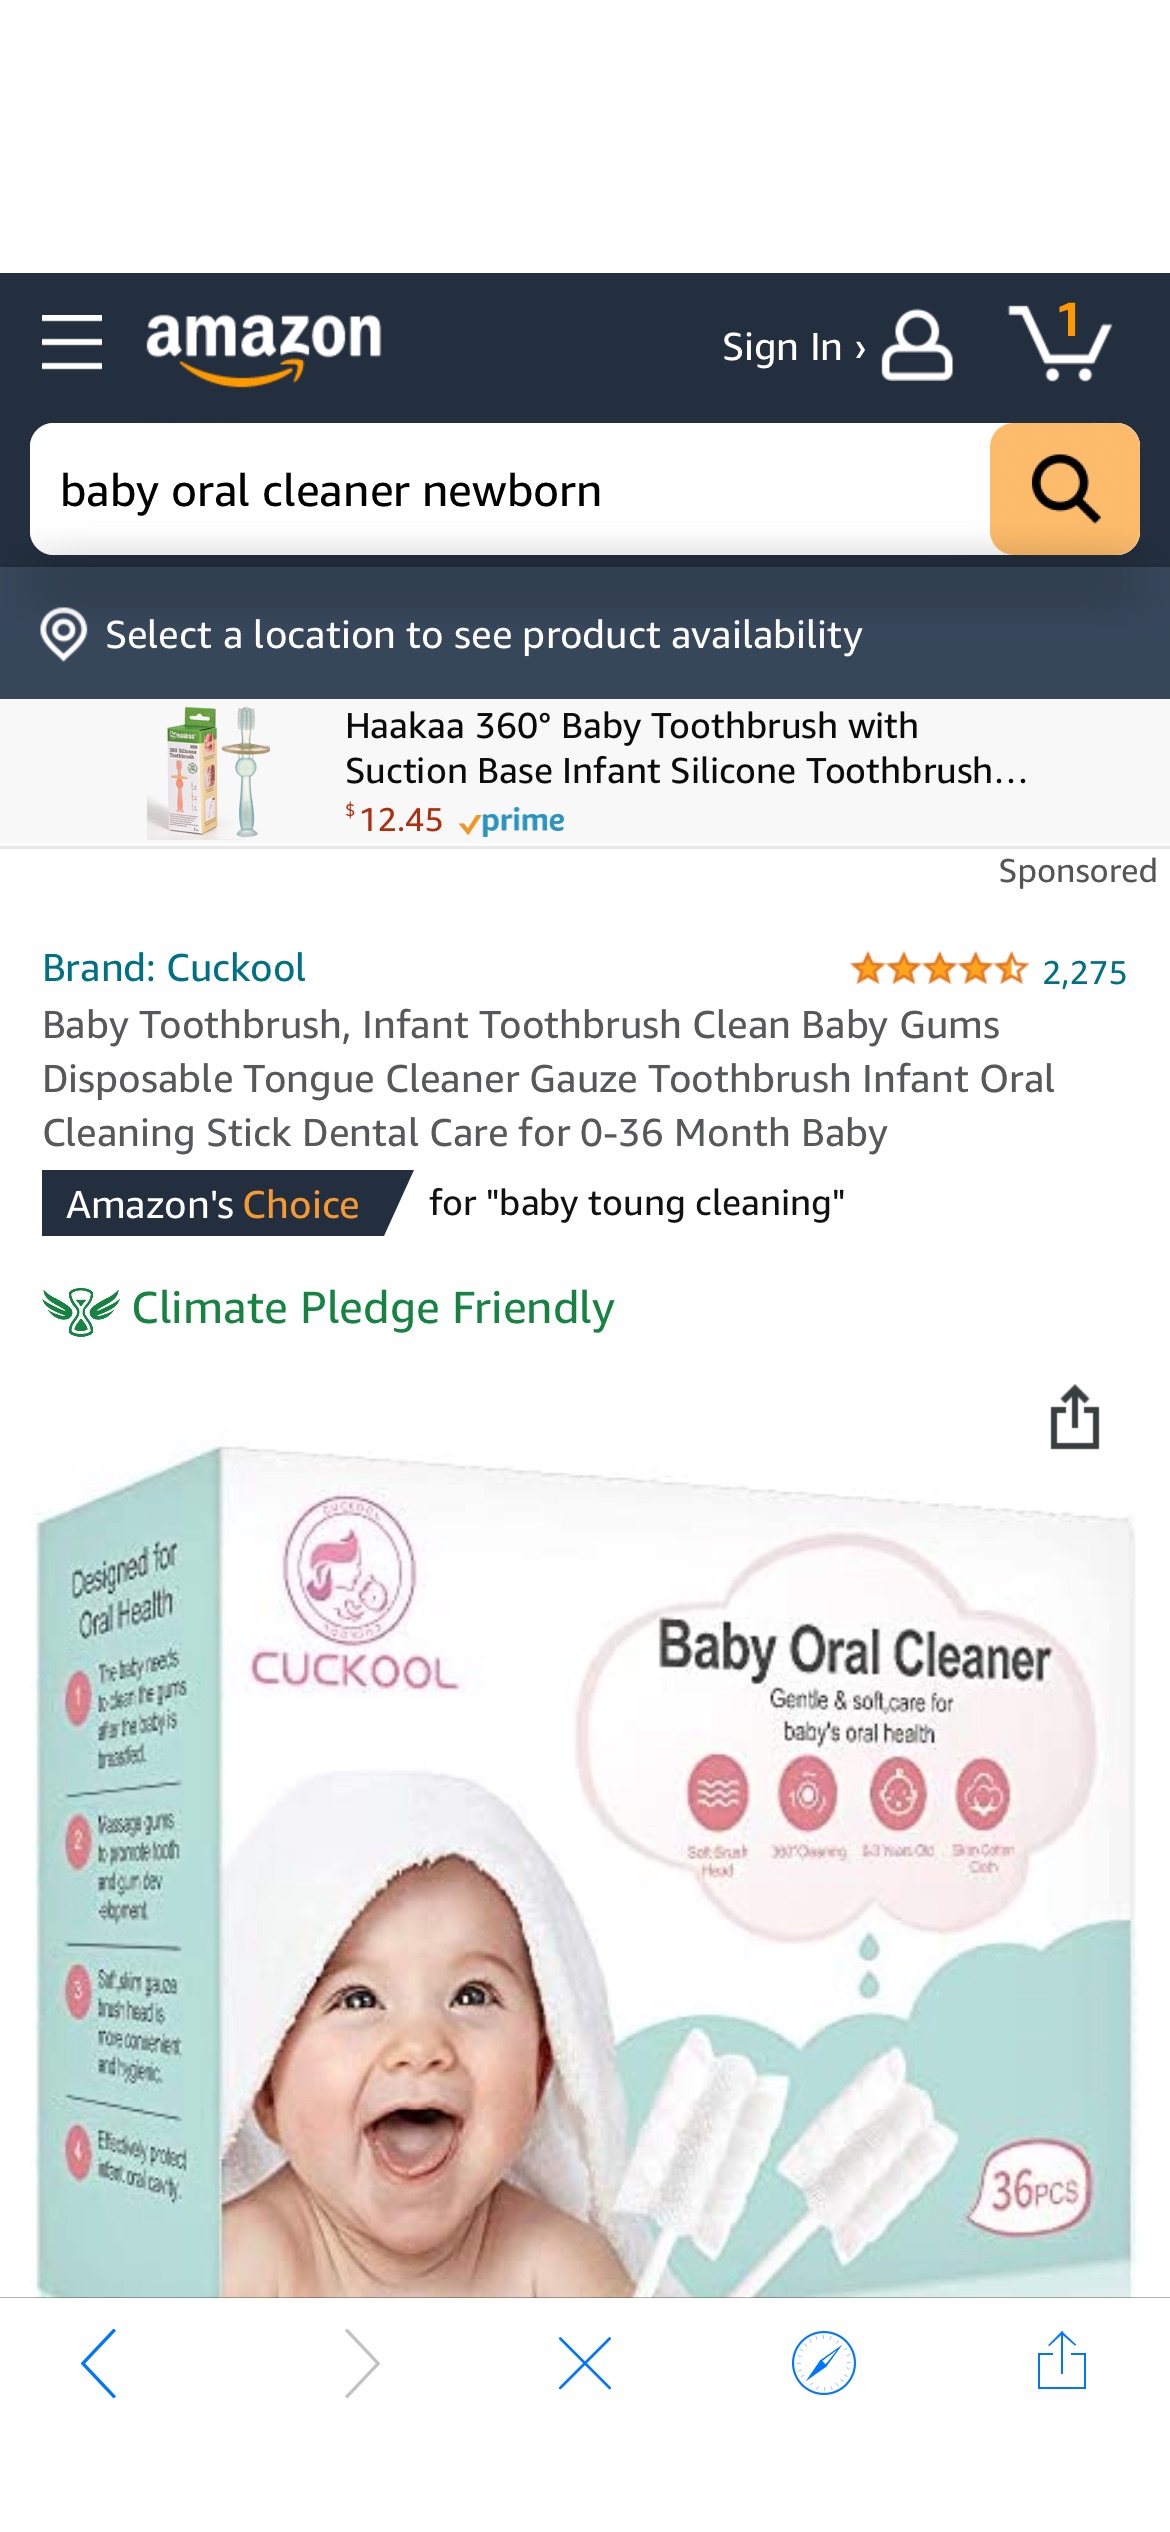 Amazon.com: Baby Toothbrush, Infant Toothbrush Clean Baby Gums Disposable Tongue Cleaner Gauze Toothbrush Infant Oral Cleaning Stick Dental Care for 0-36 婴儿口腔纱布清洁器FDA approved